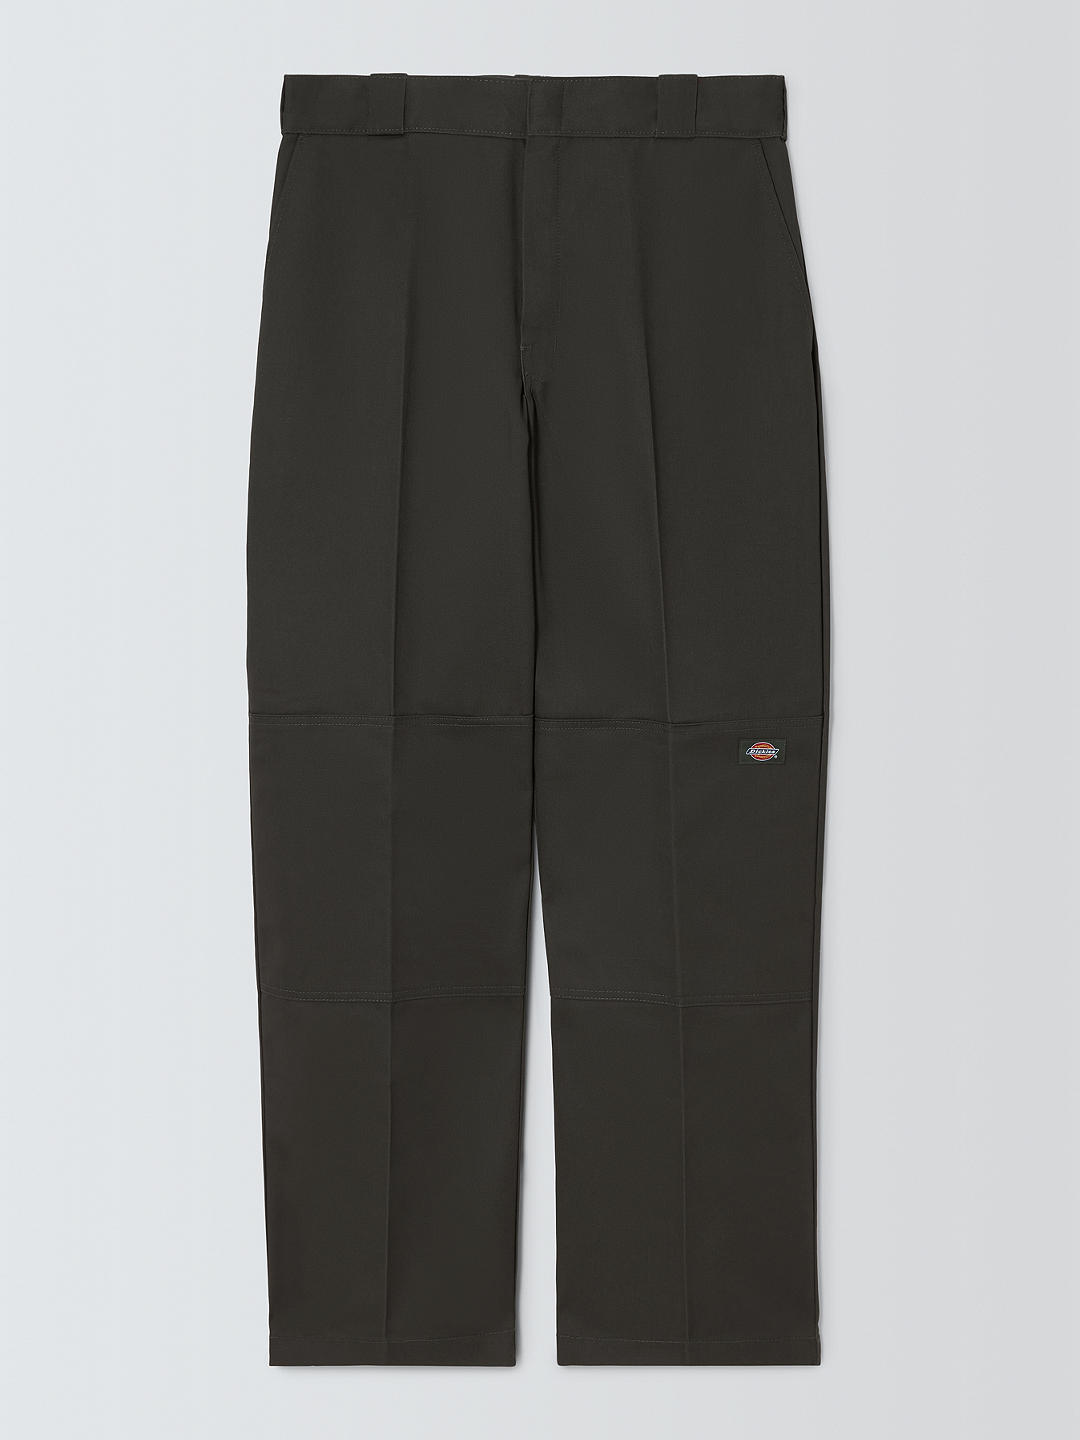 Dickies Double Knee Relaxed Fit Work Trousers, Olive Green